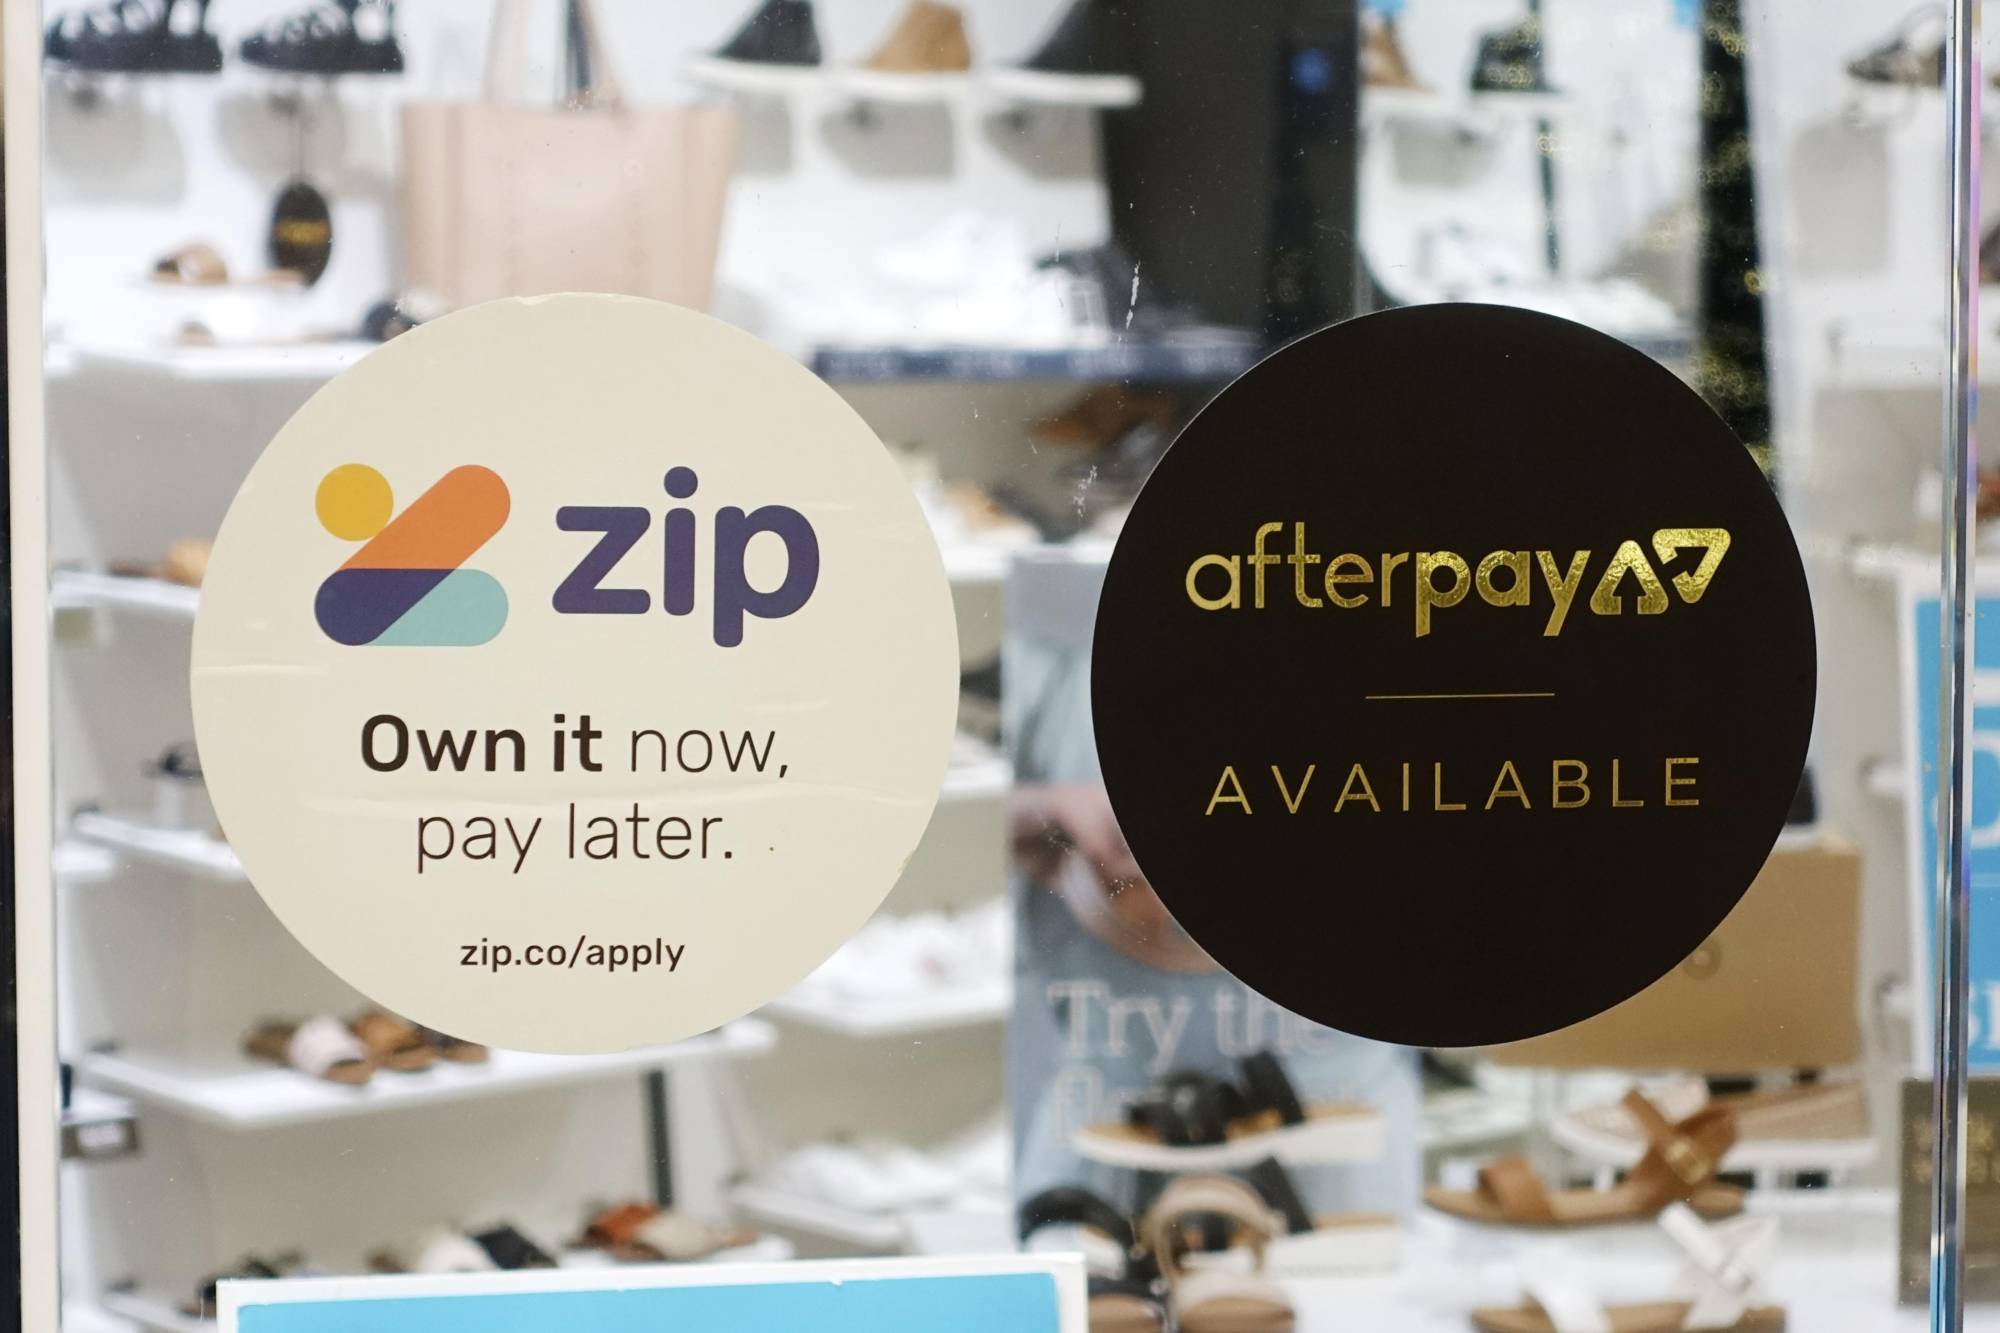 Buy now and pay later with AfterPay and Zip